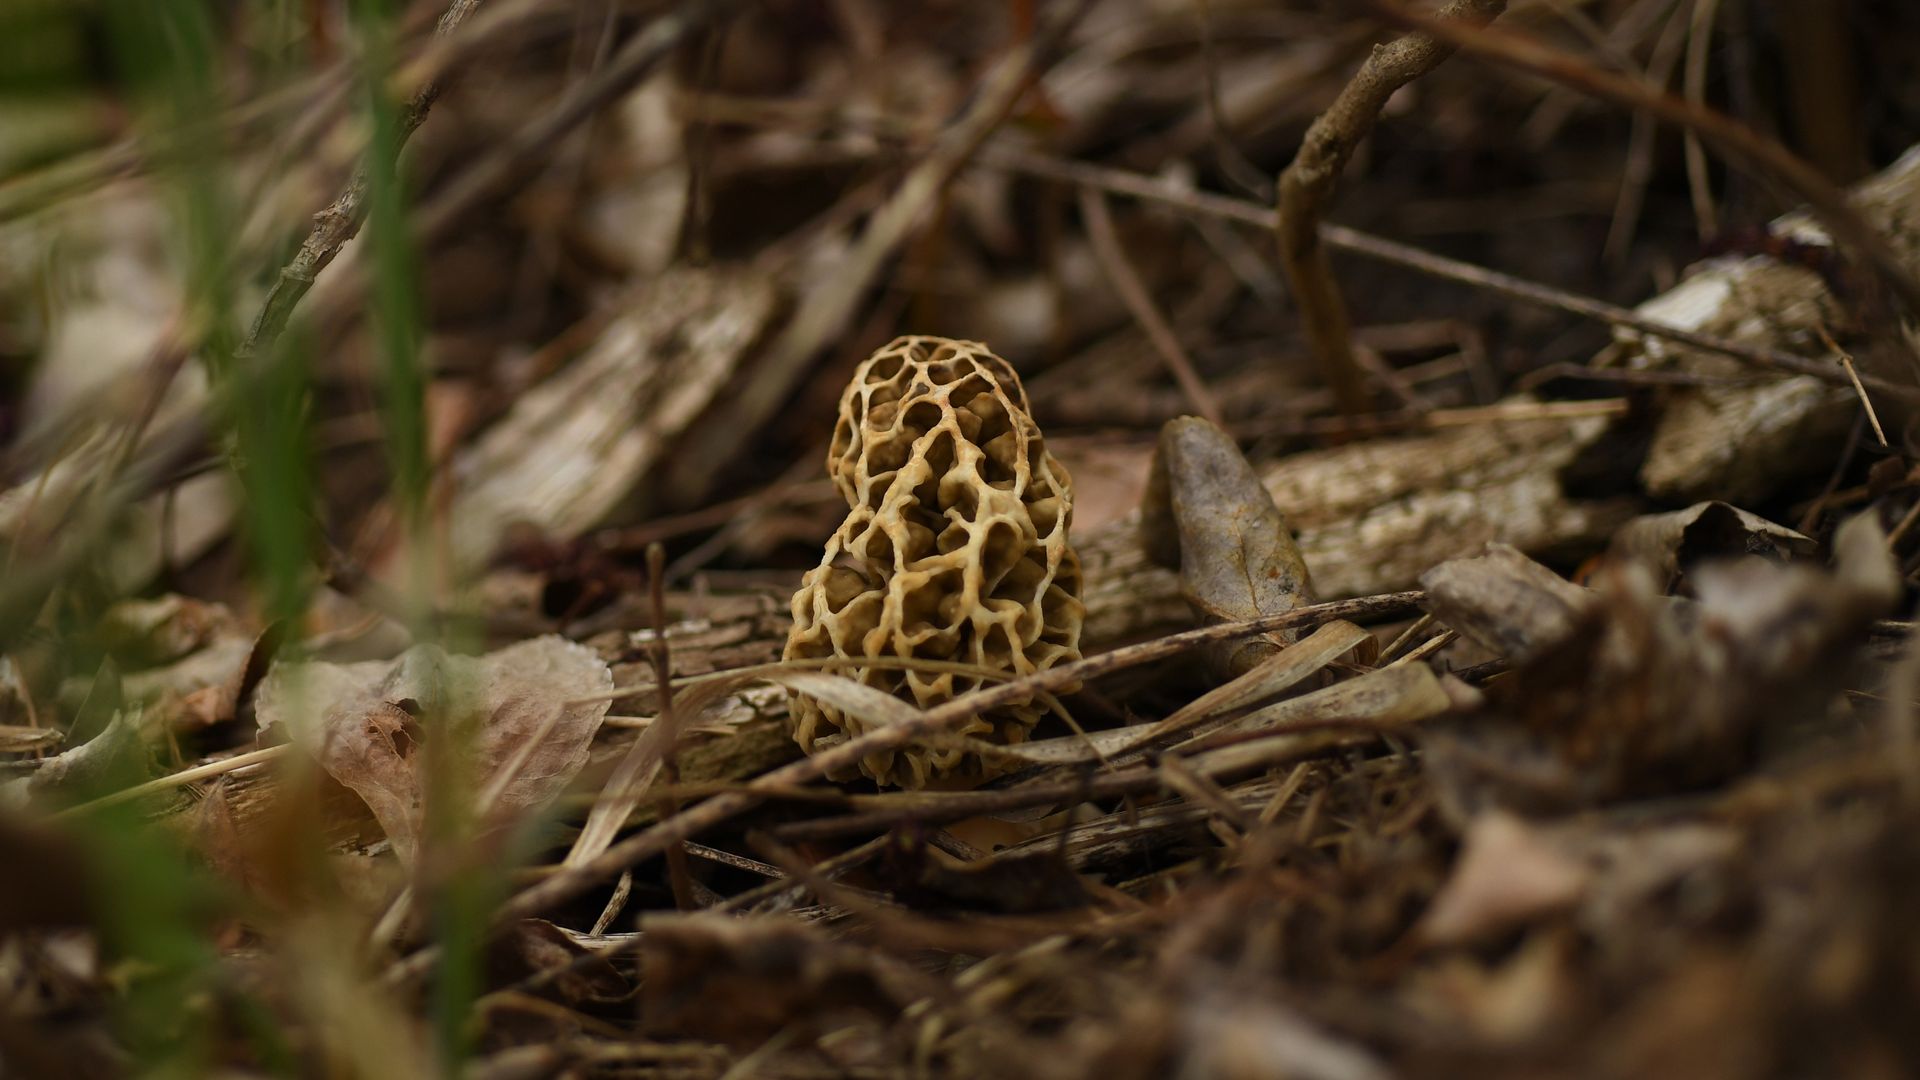 A morel, a mushroom with a brain-like cap that is brown and yellow, on a stick in the woods.